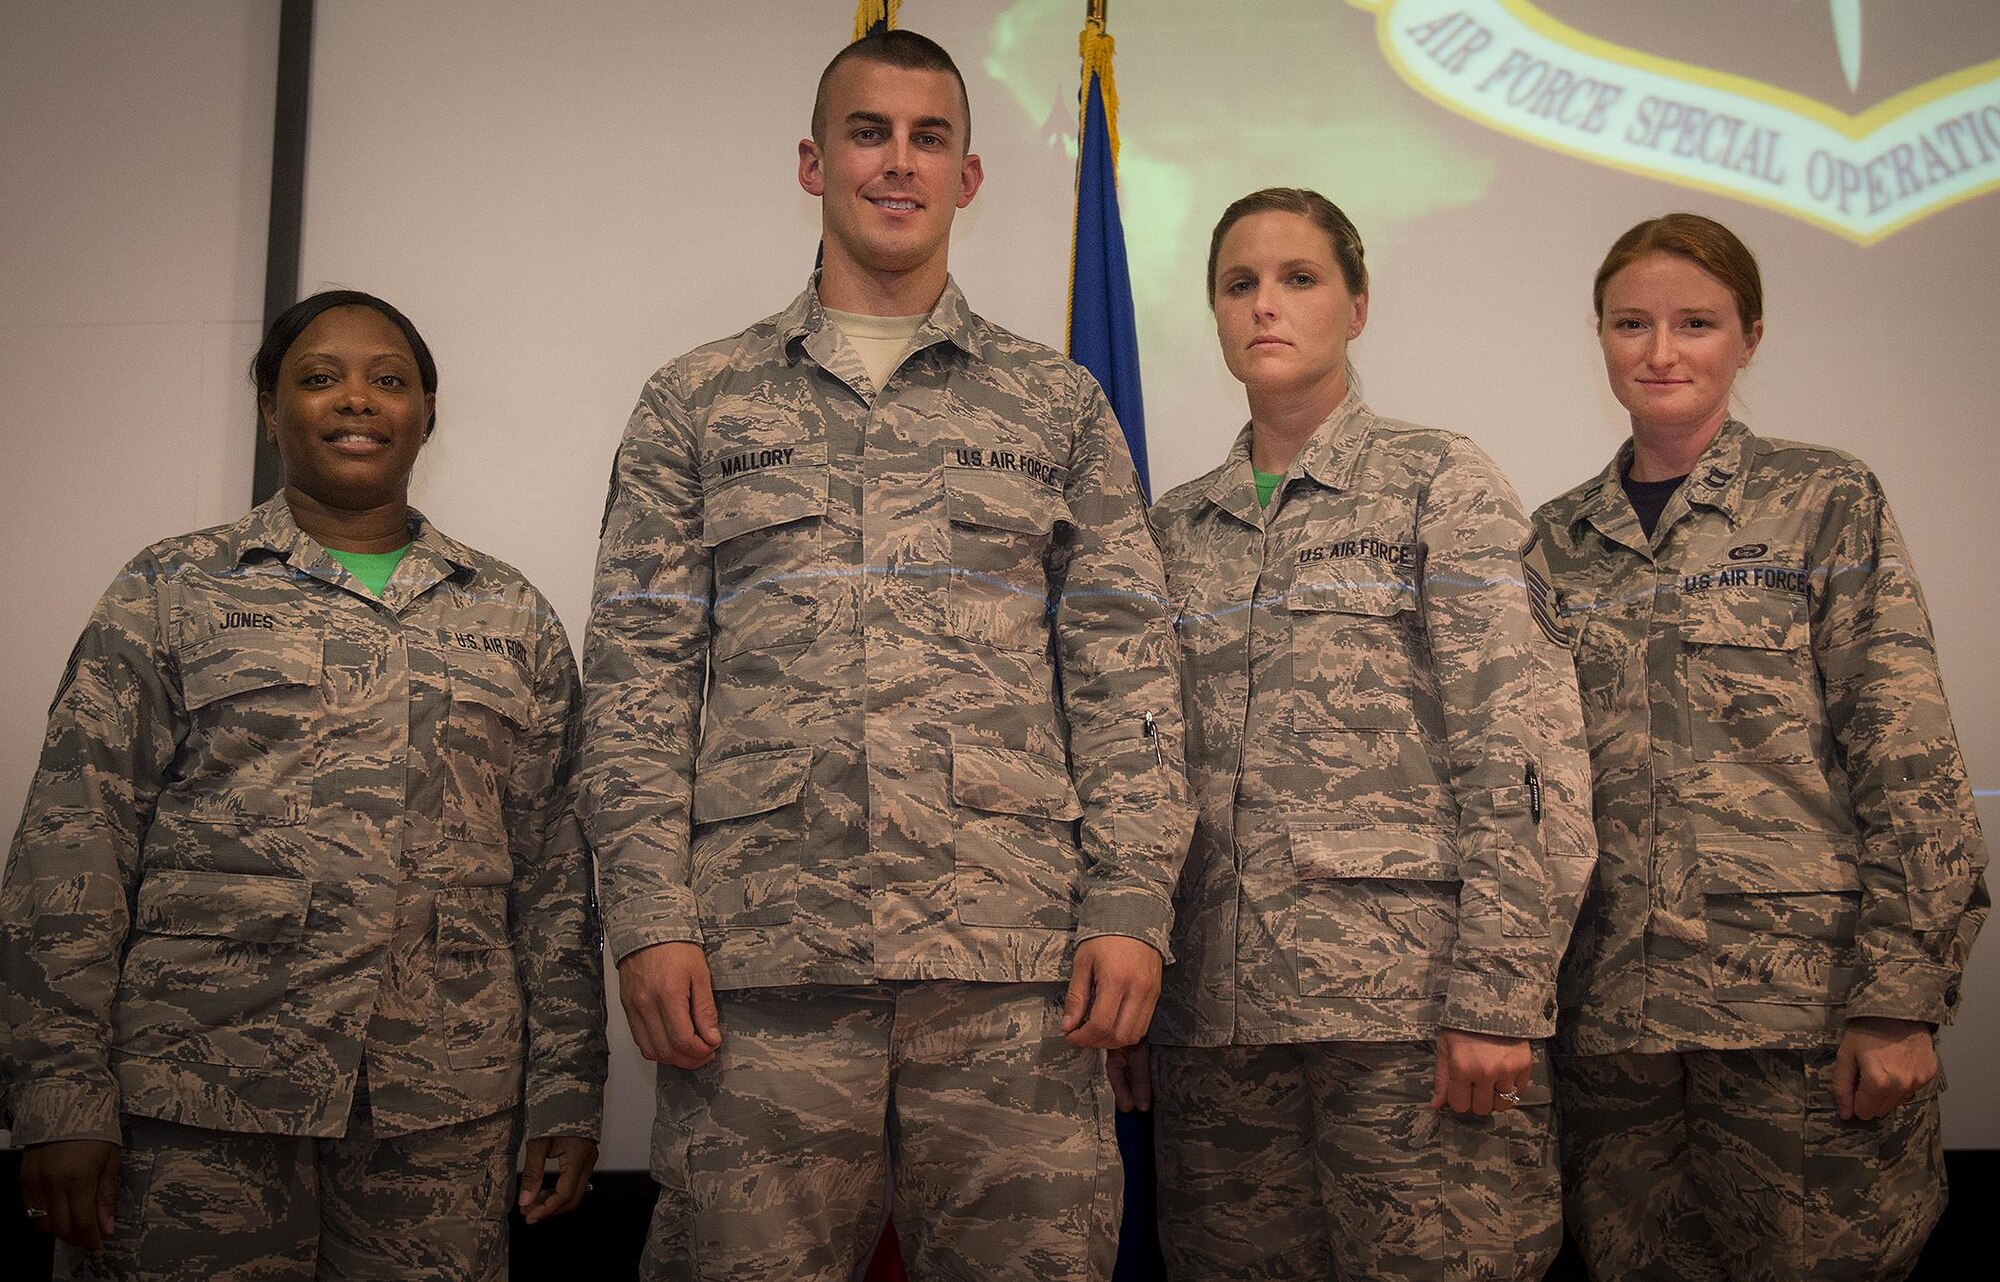 Congratulations to the 919th Special Operations Wing second quarter award winners.  From left to right:  Senior Airman Natassa Jones, Tech. Sgt. Justin Mallory, Master Sgt. Christina Anger and Capt. Kassandra Pesek.  (U.S. Air Force photo/Tech. Sgt. Sam King)